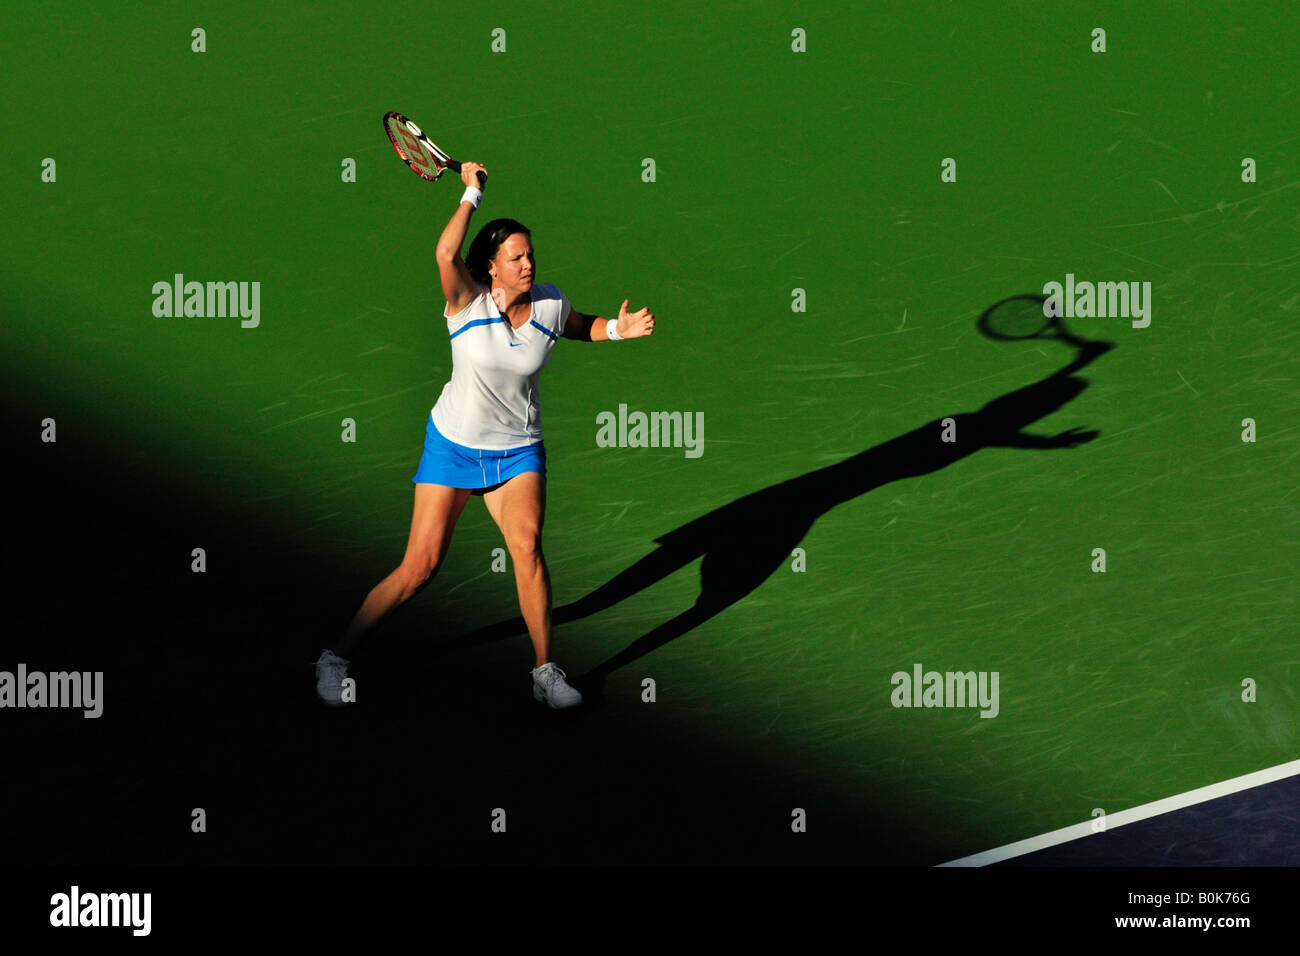 Lindsay Davenport strokes a forehand and casts a long shadow at the 2008 Indian Wells Pacific Life Open. Stock Photo